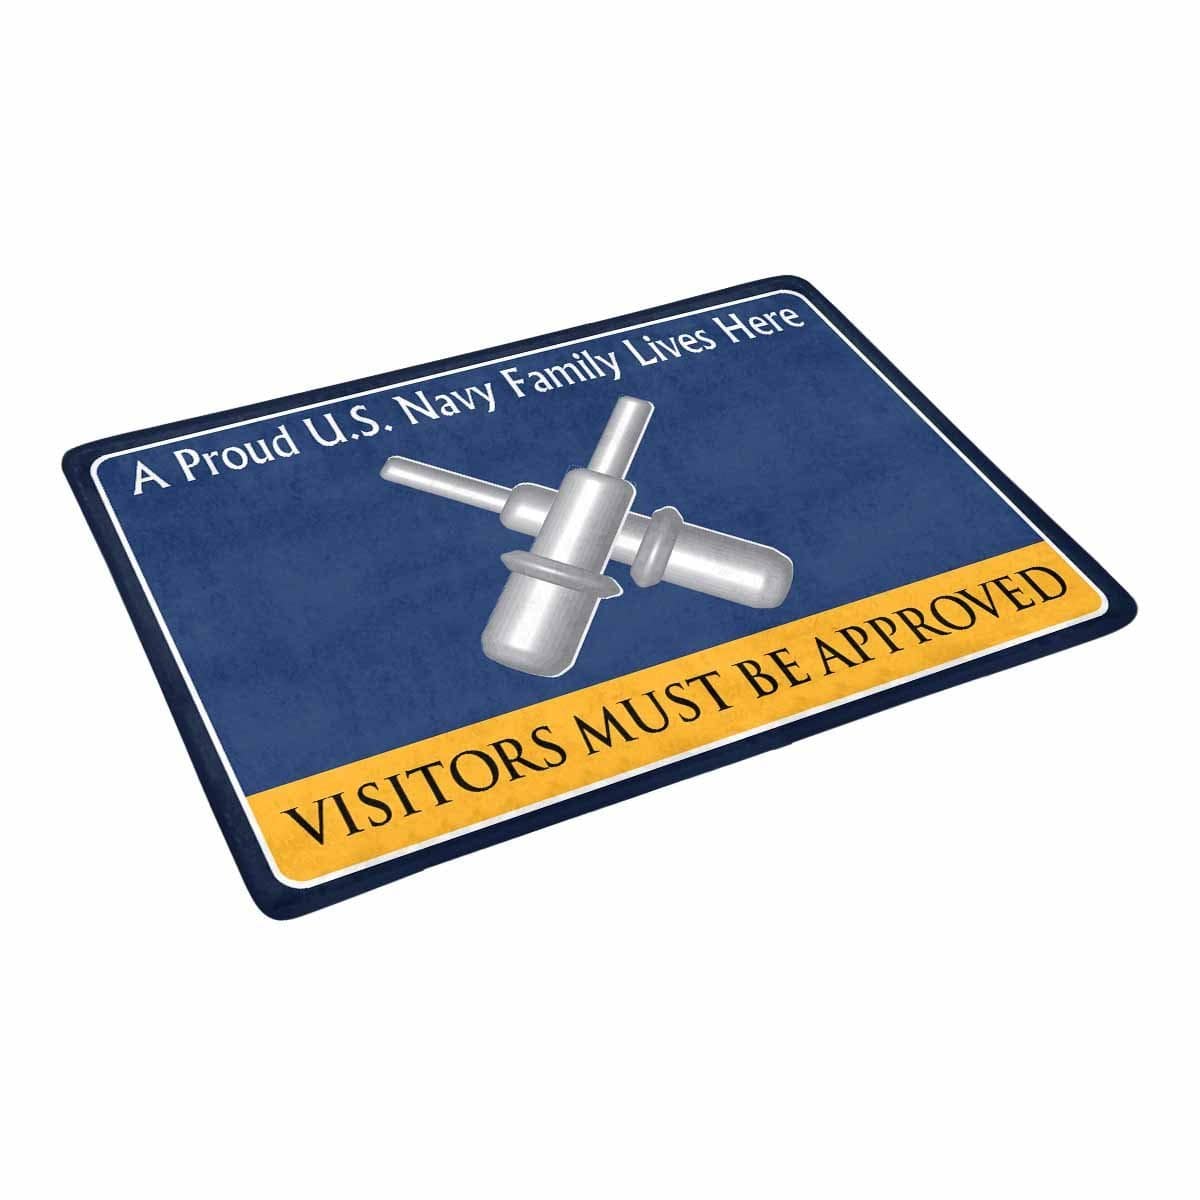 U.S Navy Gunner's mate Navy GM Family Doormat - Visitors must be approved (23,6 inches x 15,7 inches)-Doormat-Navy-Rate-Veterans Nation